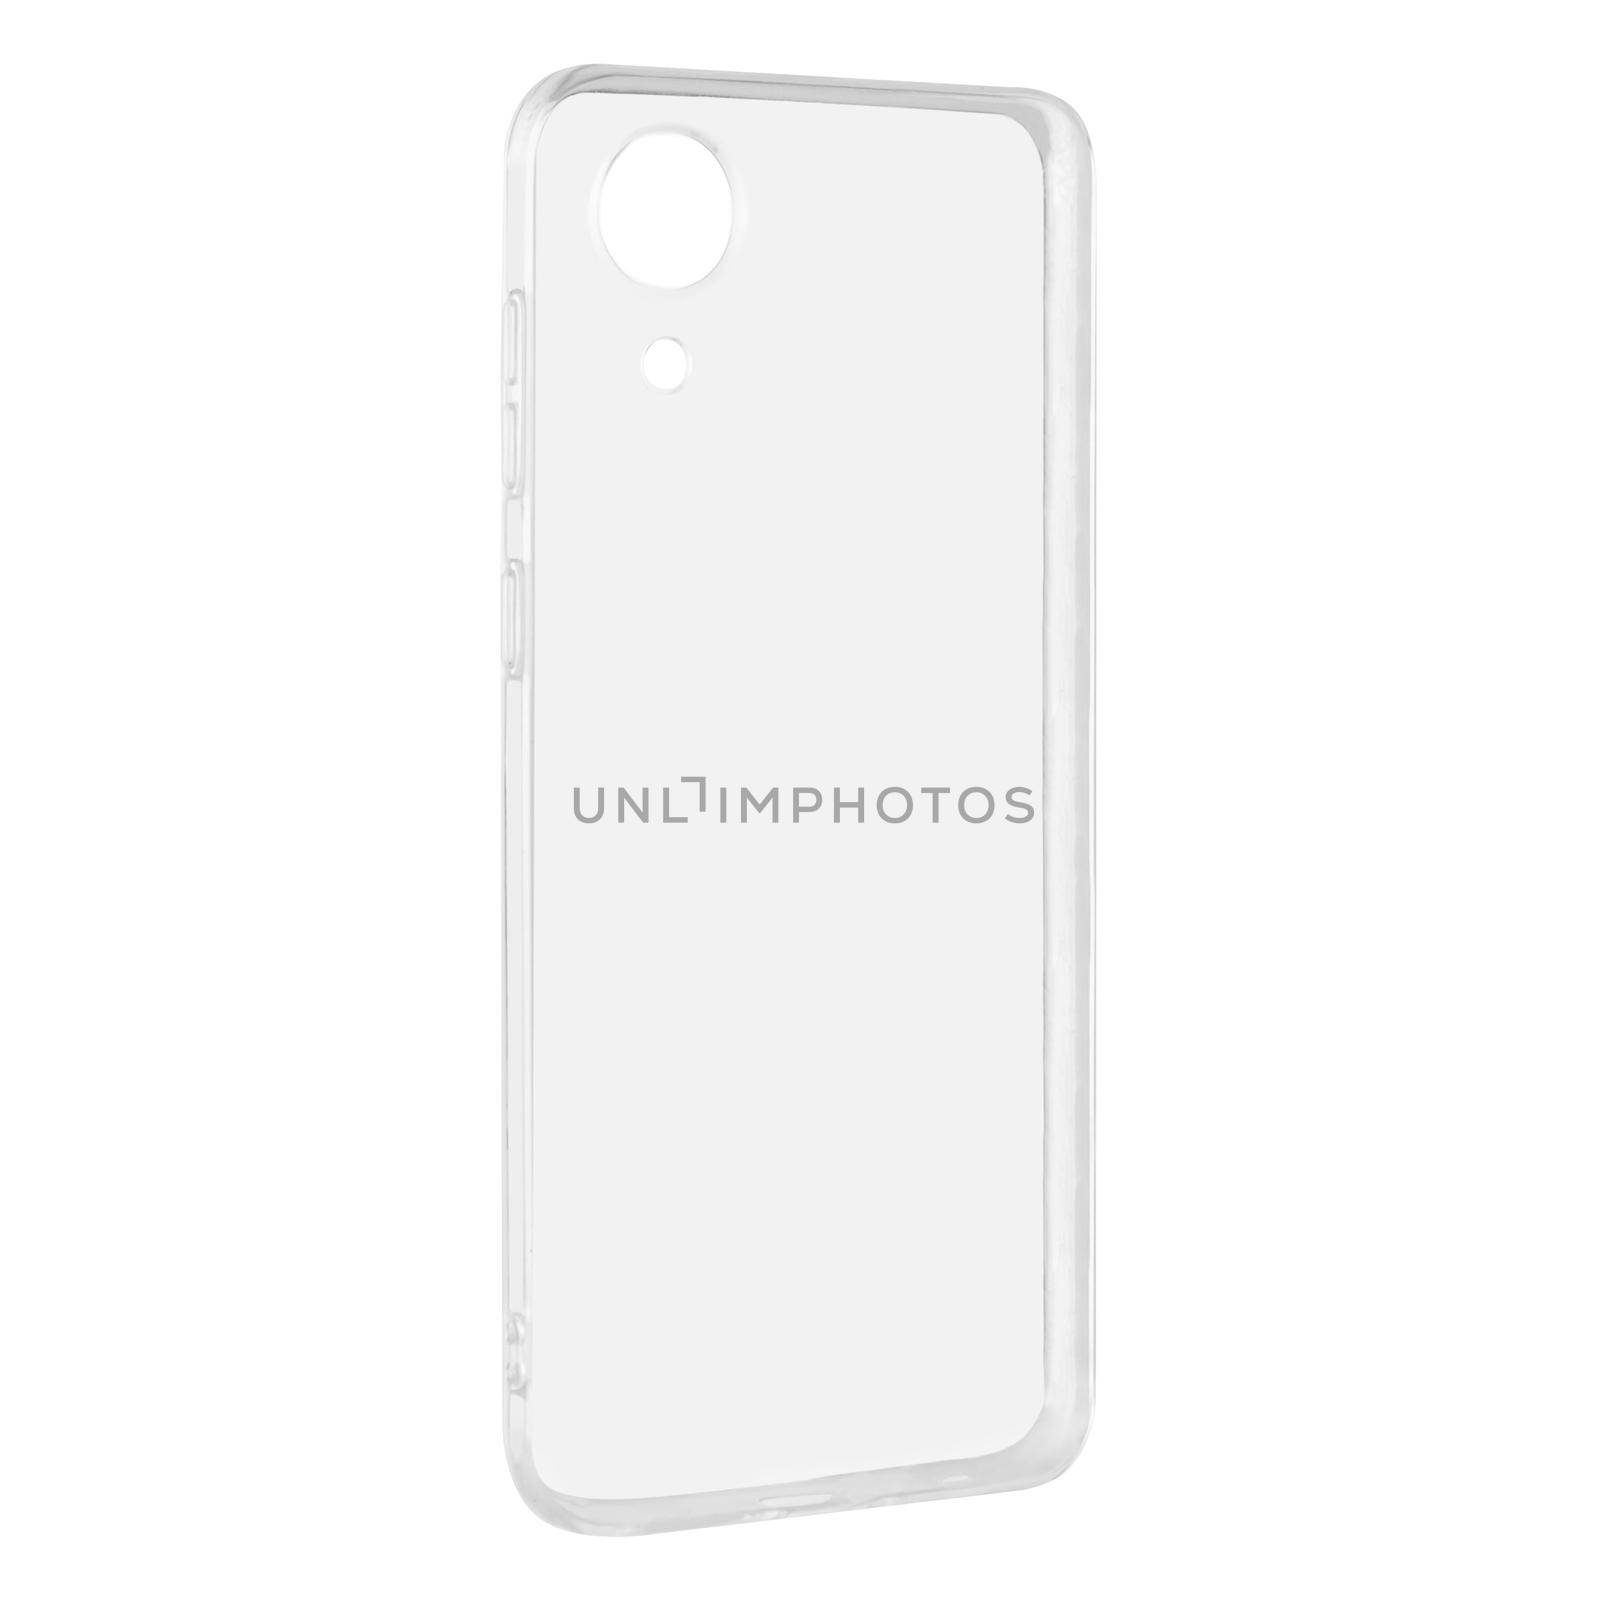 transparent silicone case, accessory for phone, on white background